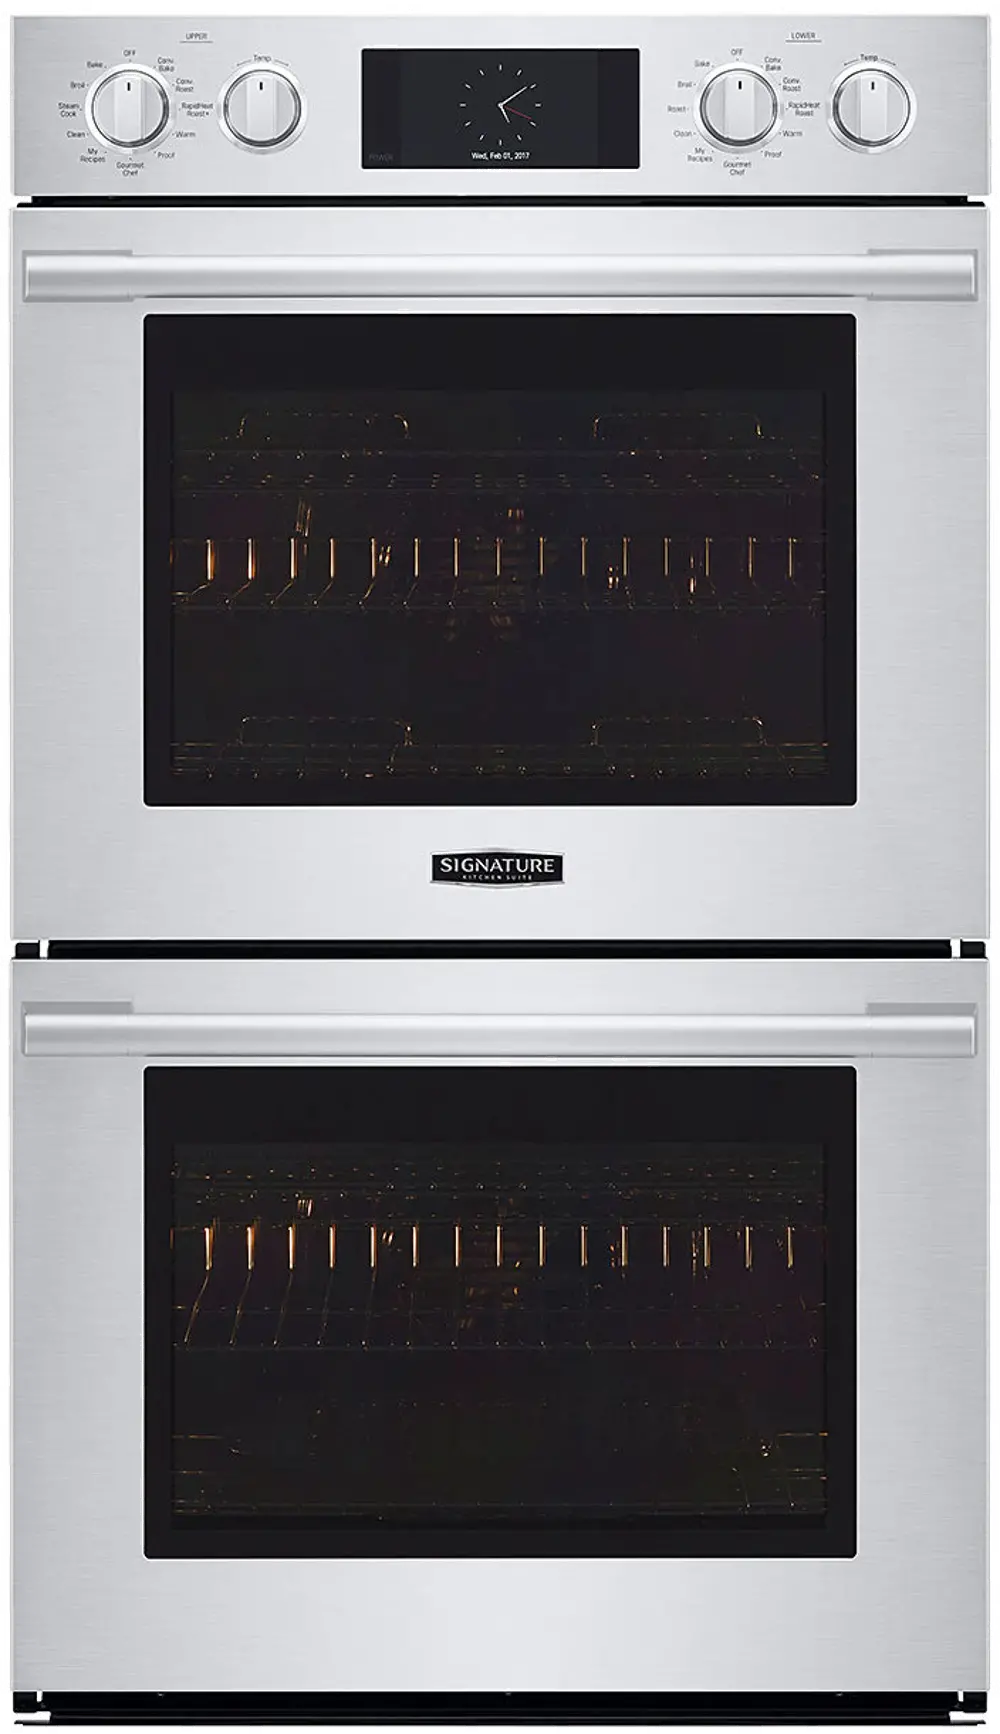 SKSDV3002S Signature Kitchen Suites 9.4 cu ft Double Wall Oven - Stainless Steel 30 Inch-1